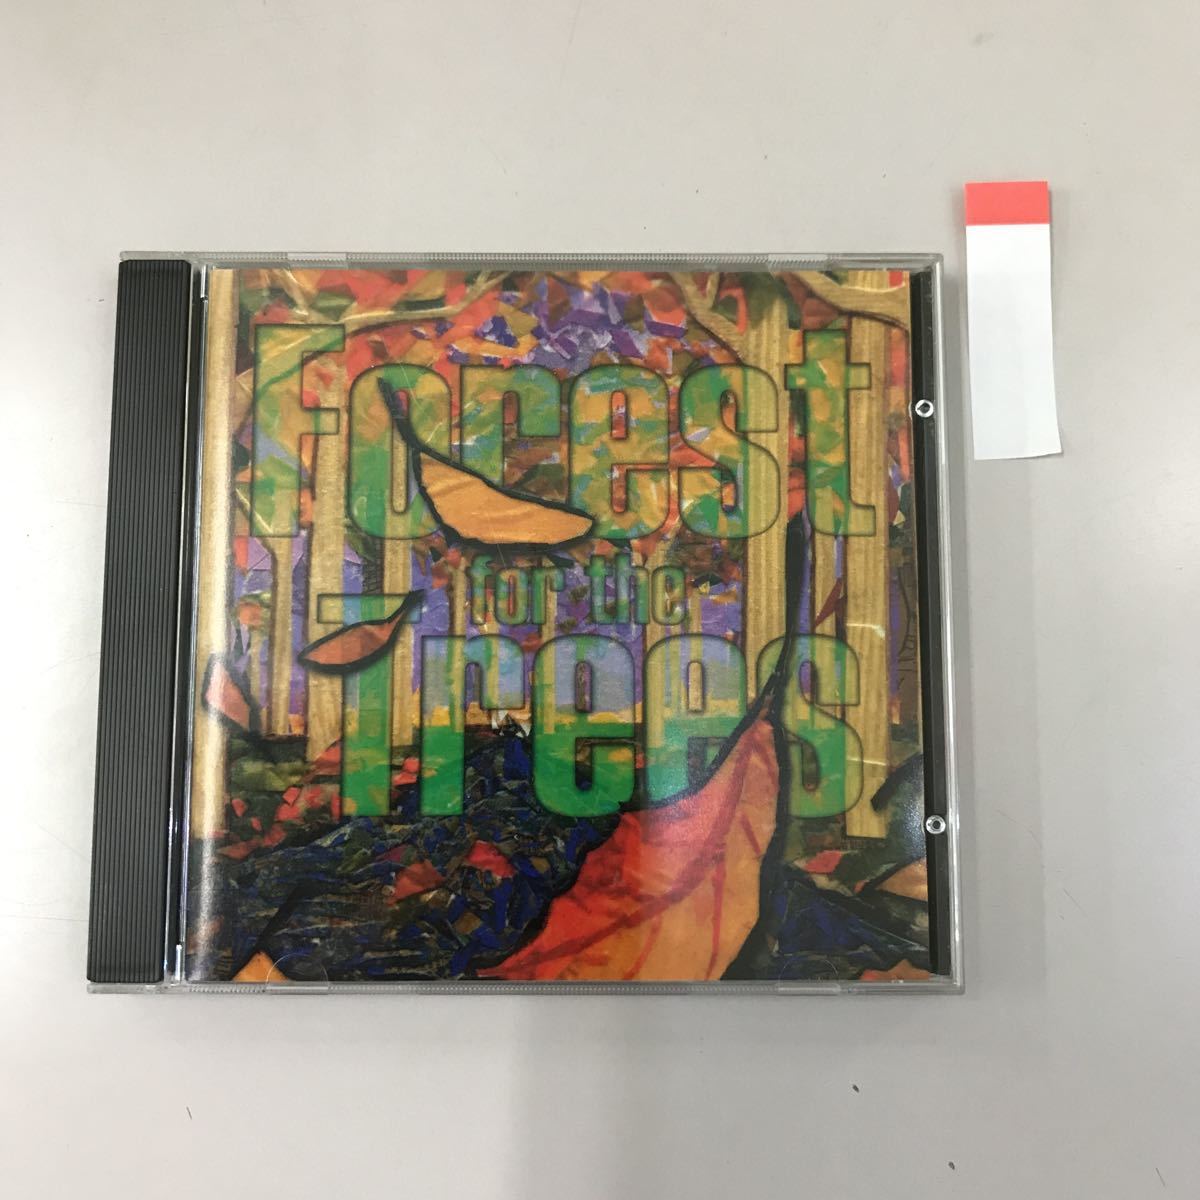 CD 輸入盤 中古【洋楽】長期保存品 FOREST FOR THE TREES